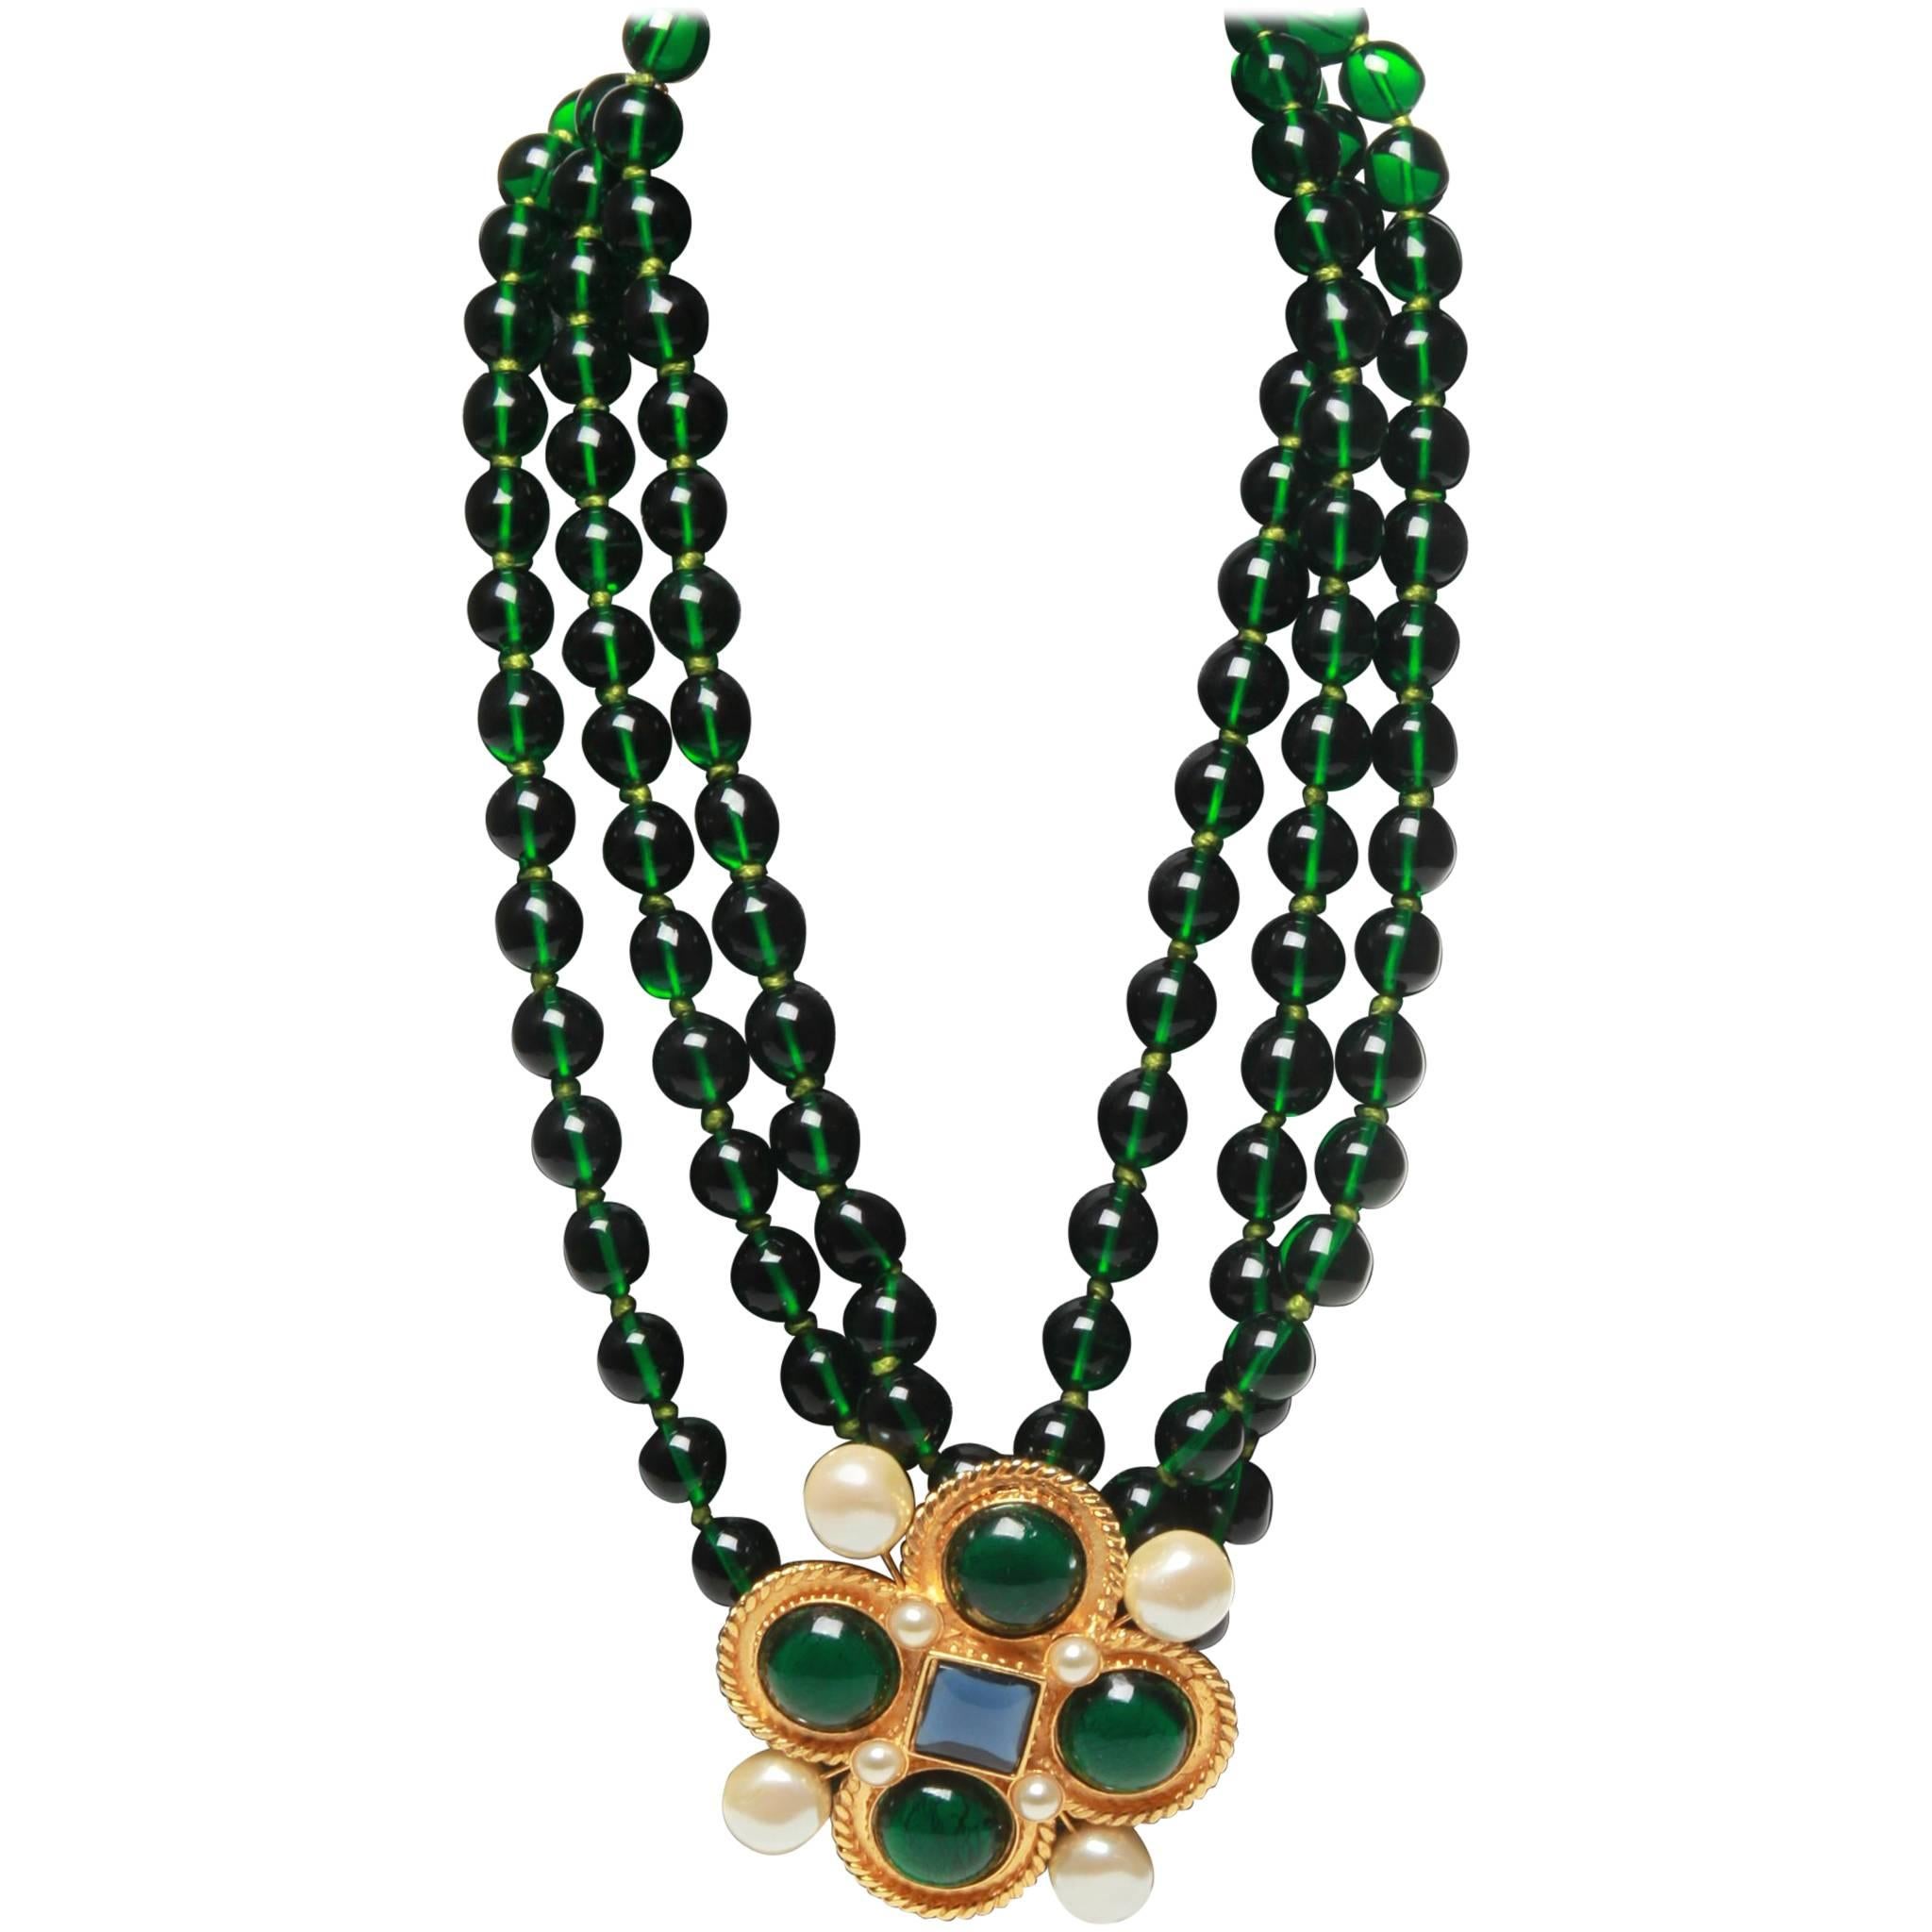 	Chanel vintage large green necklace with brooch x4 green giproix stones